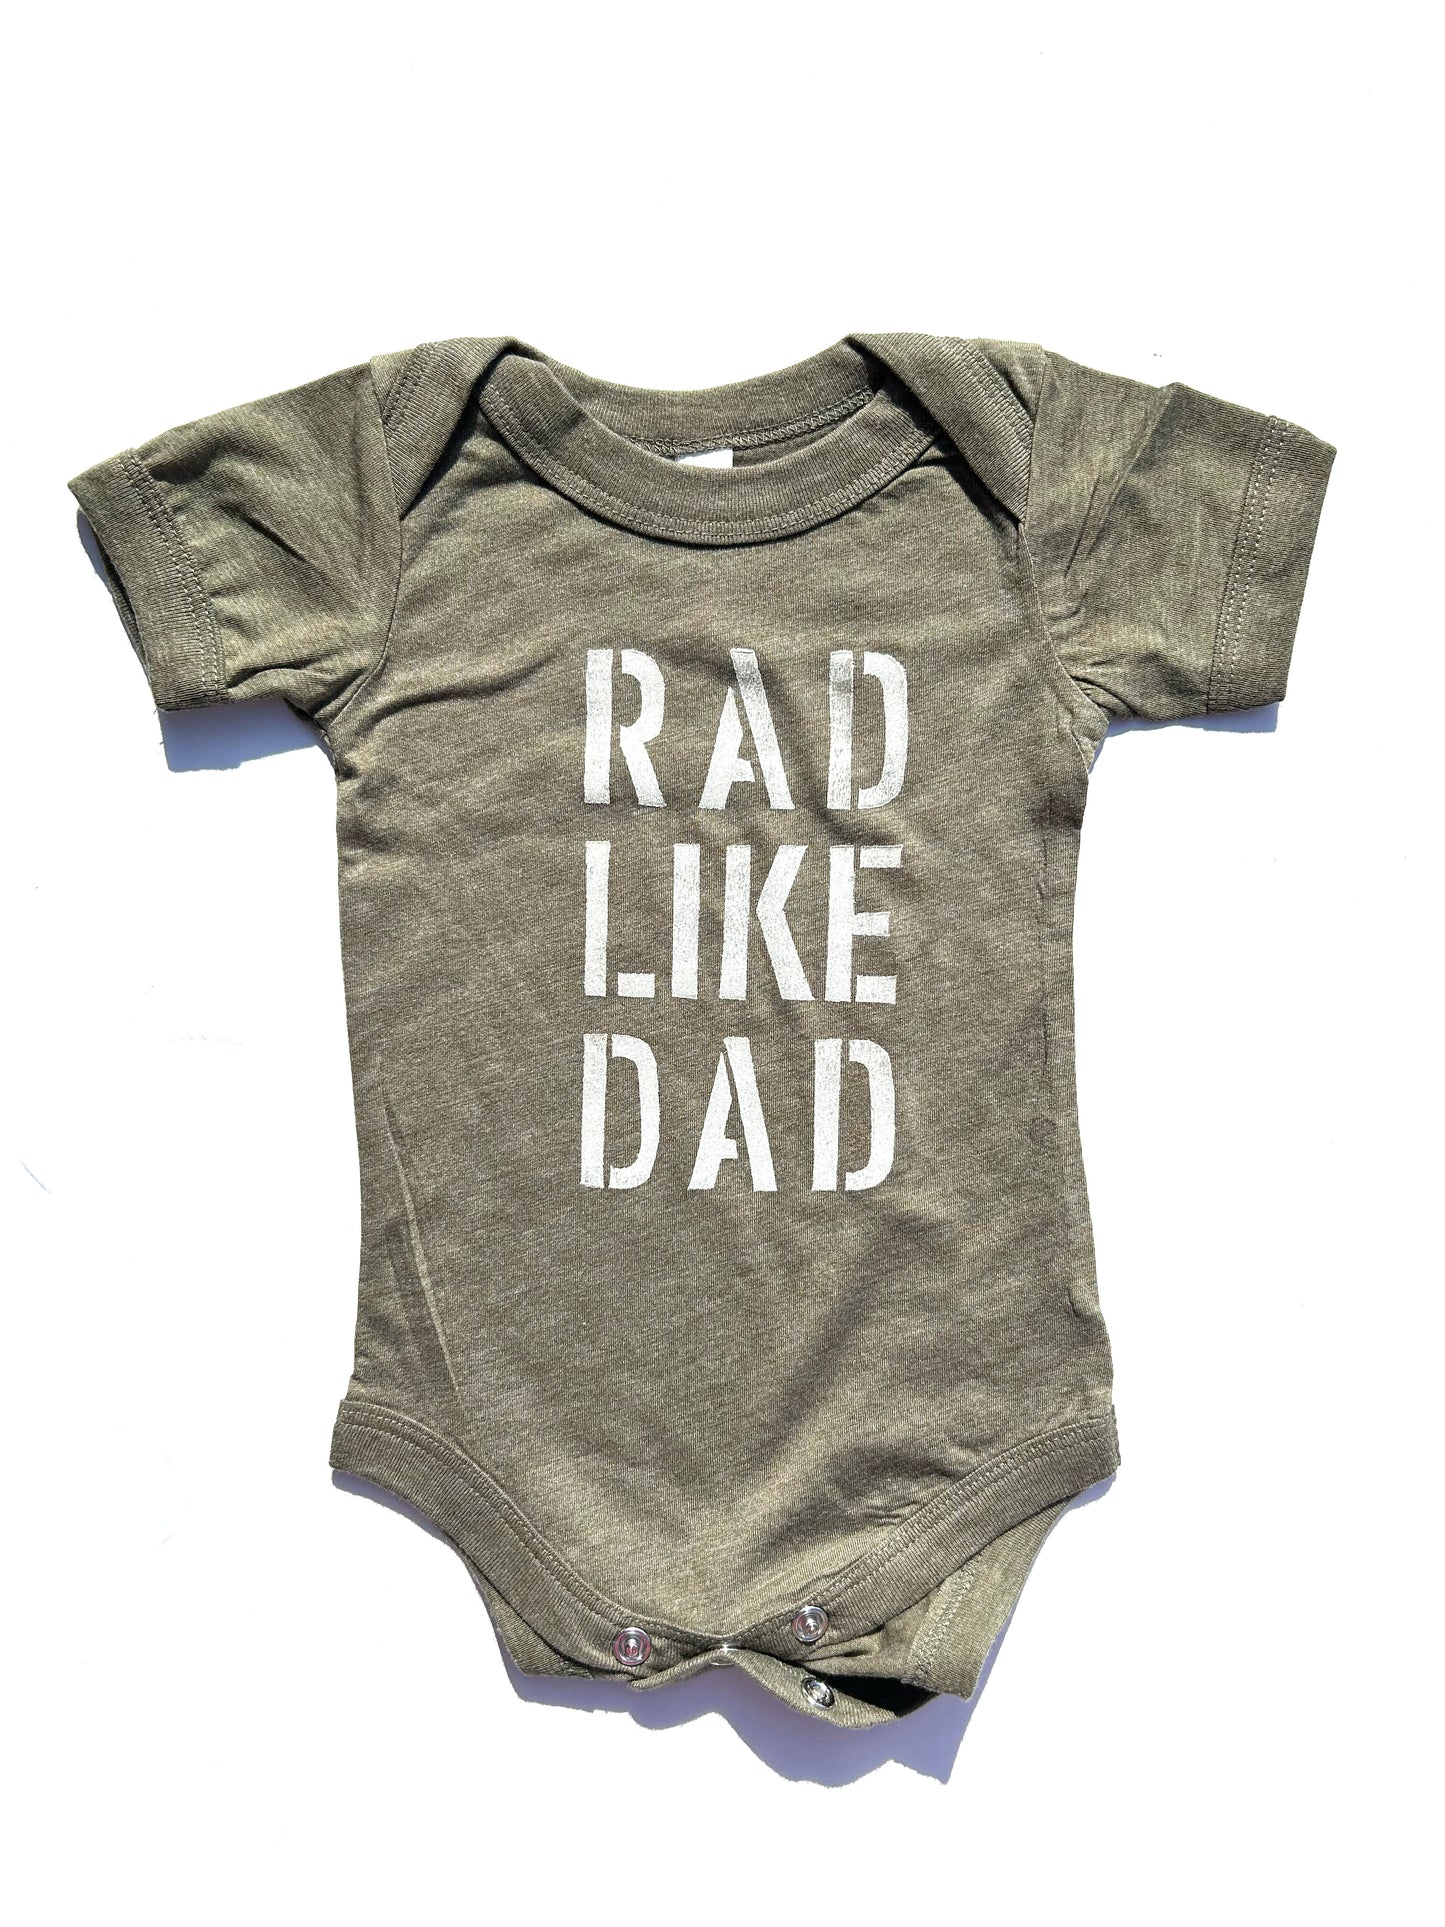 rad like dad  baby one piece: spray painted letters style